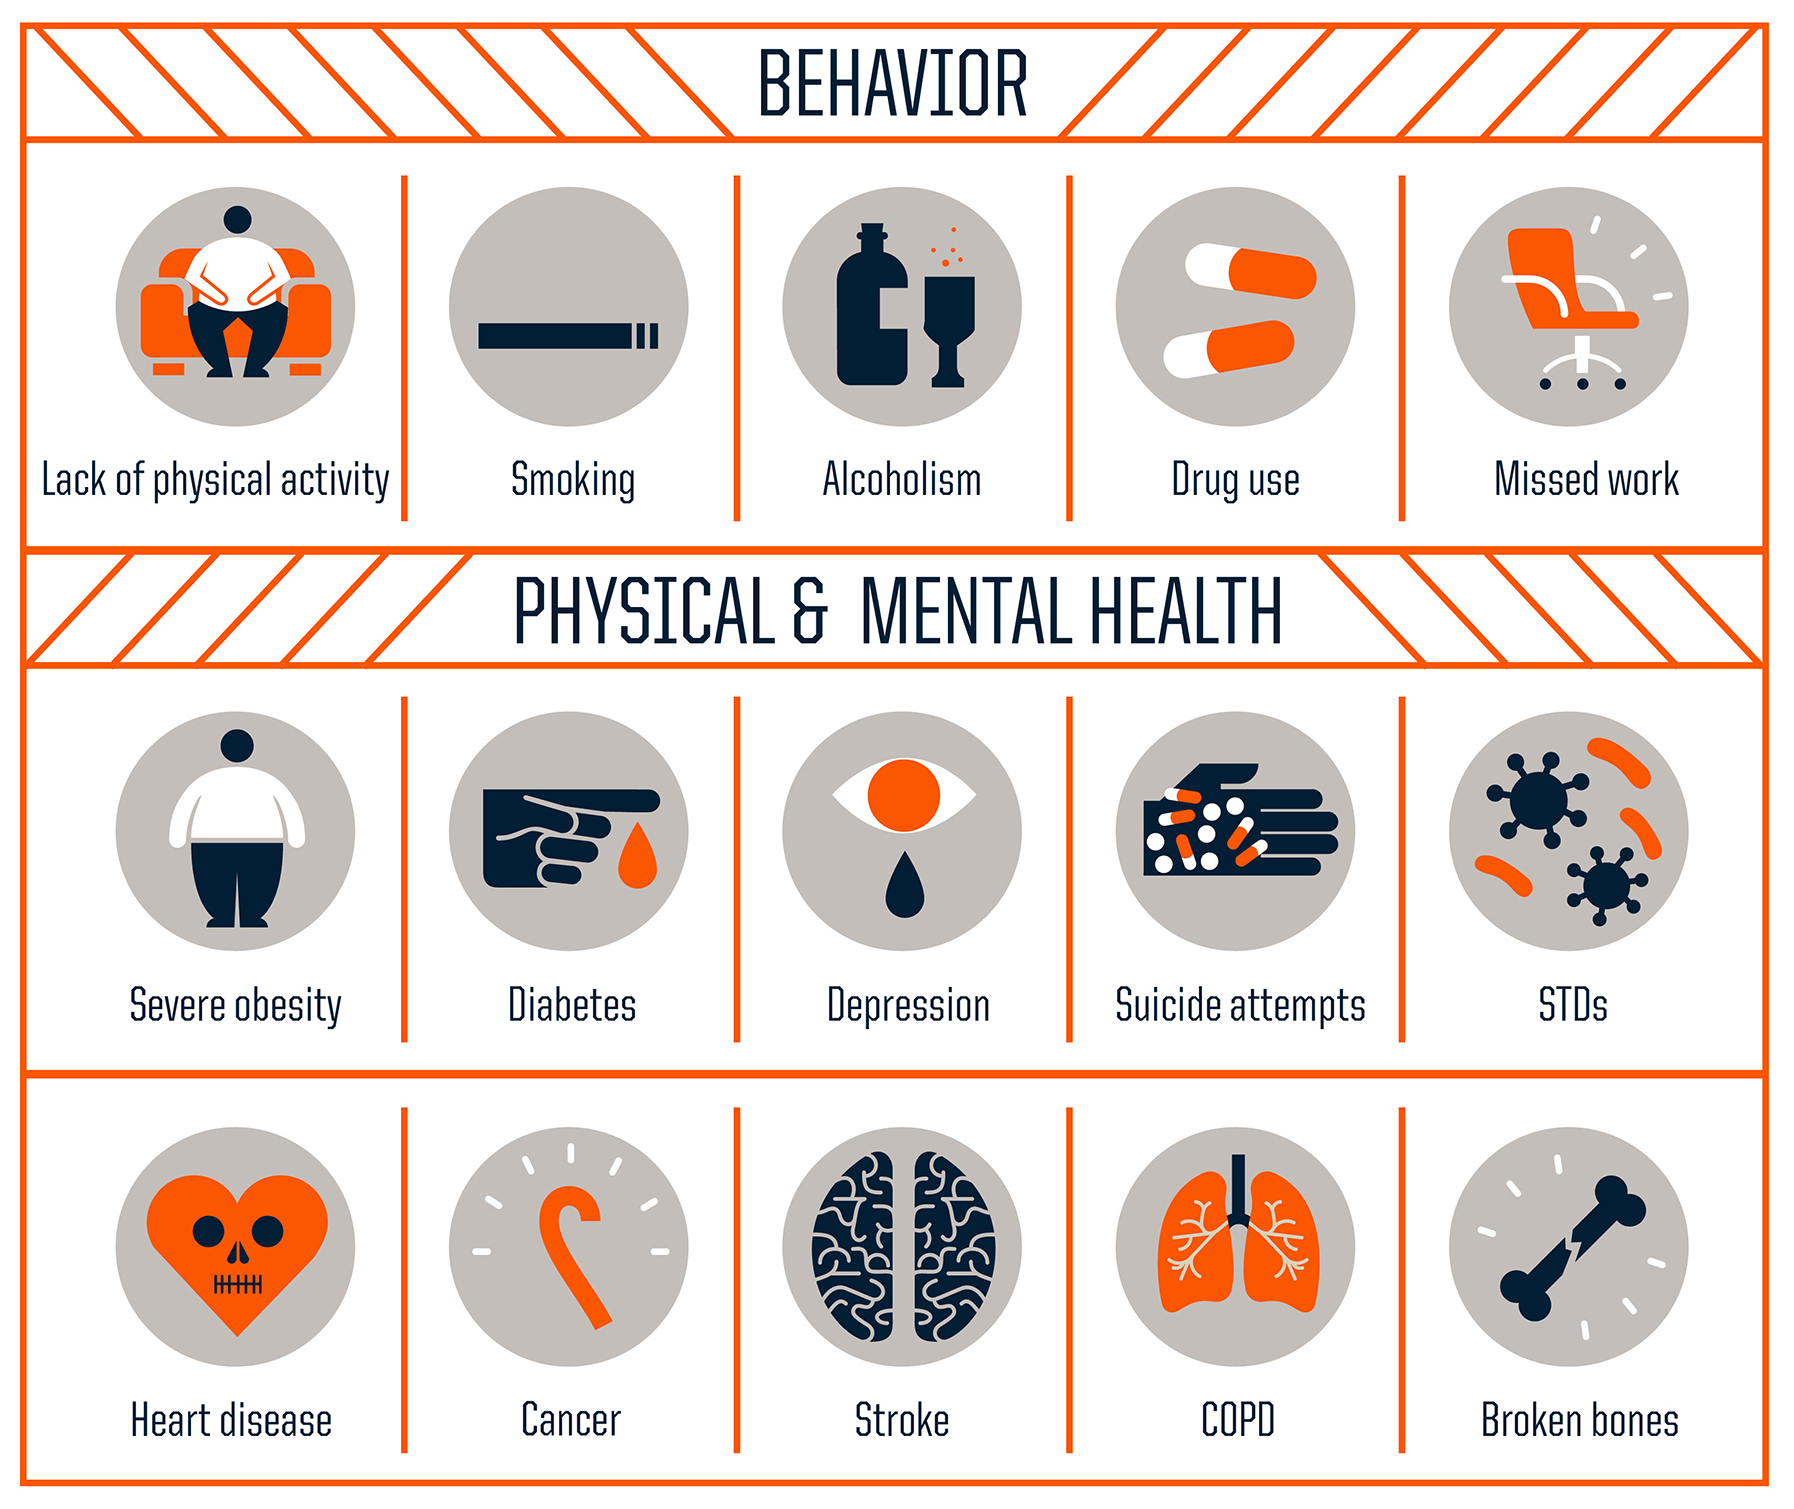 The beahvioral, physical, and mental health issues related to Adverse Childhood Experiences